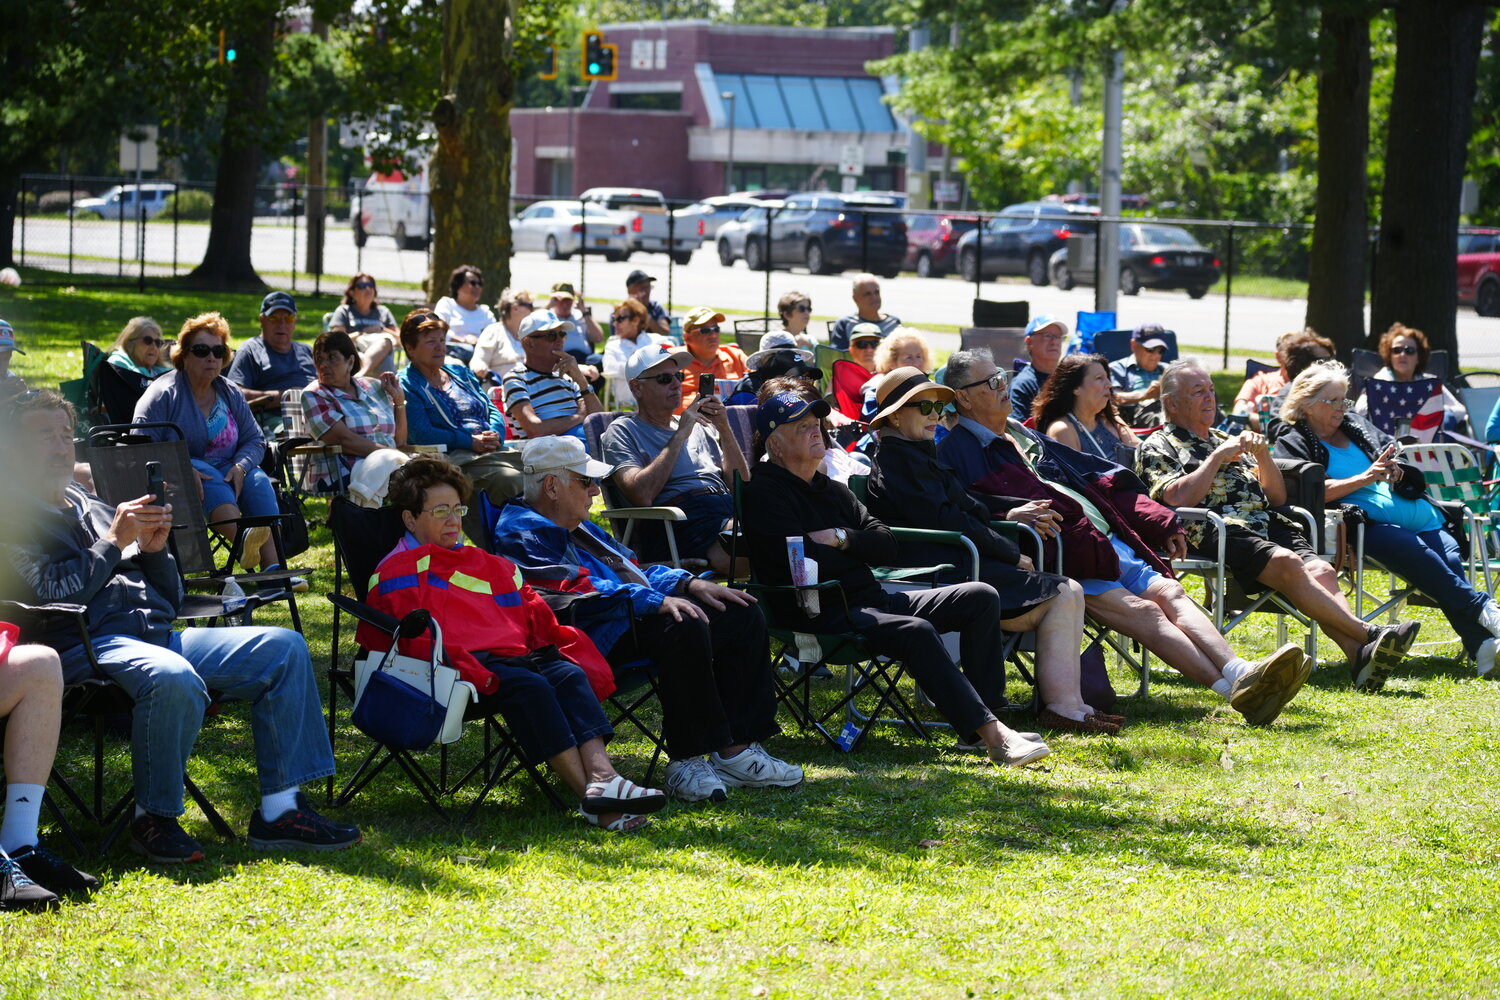 The county’s afternoon concerts are geared towards seniors and older adults. A large crowd packed into the field of Eisenhower’s Field 1.